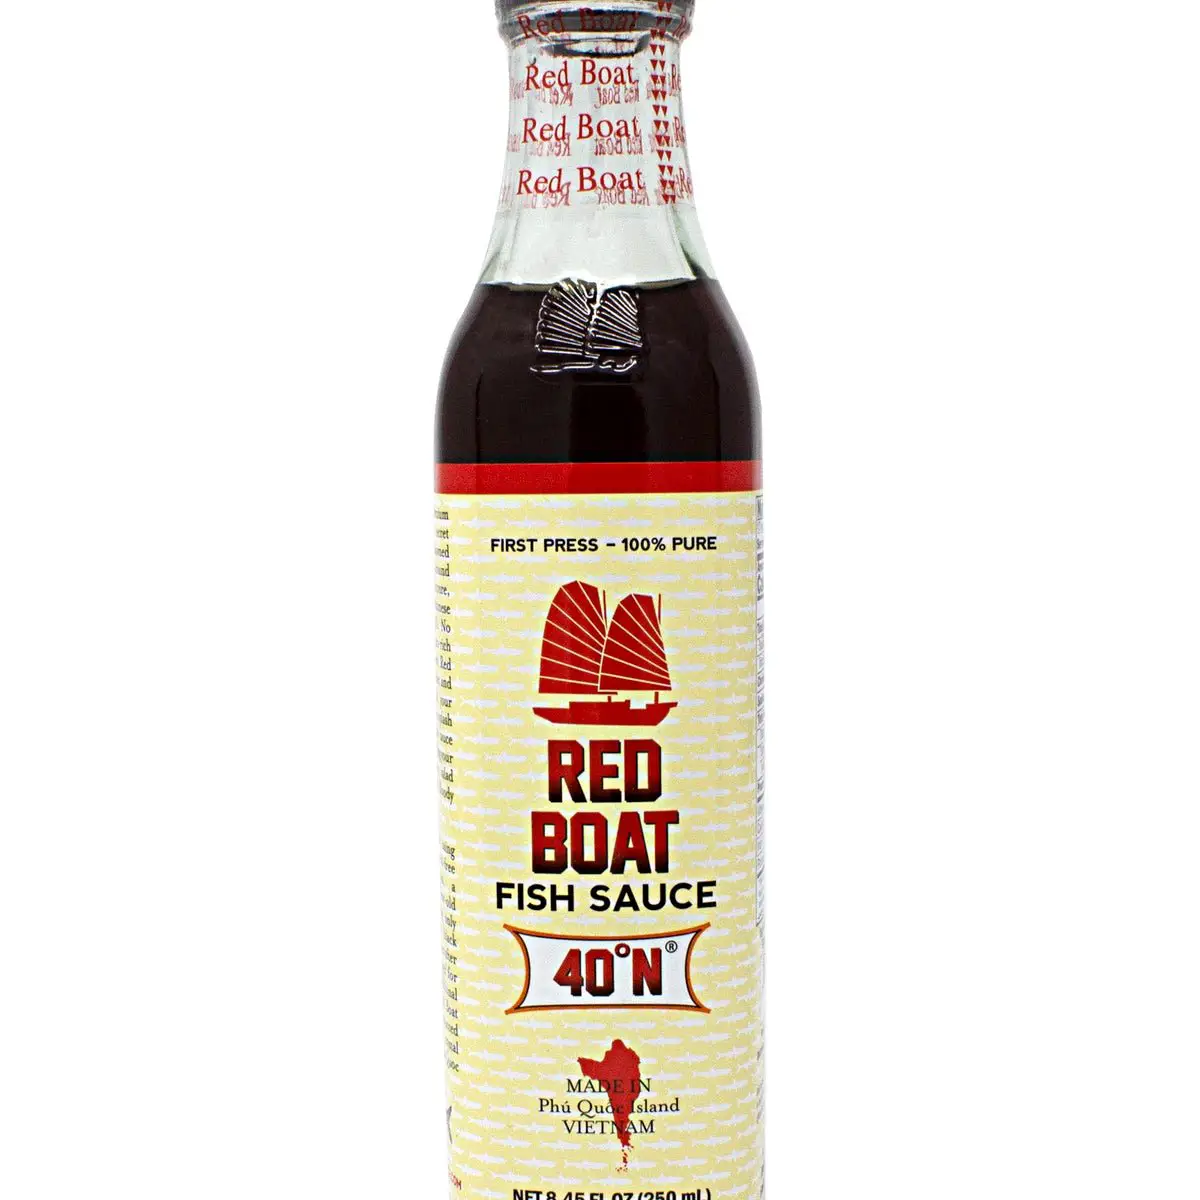 Red Boat 40°N Fish Sauce